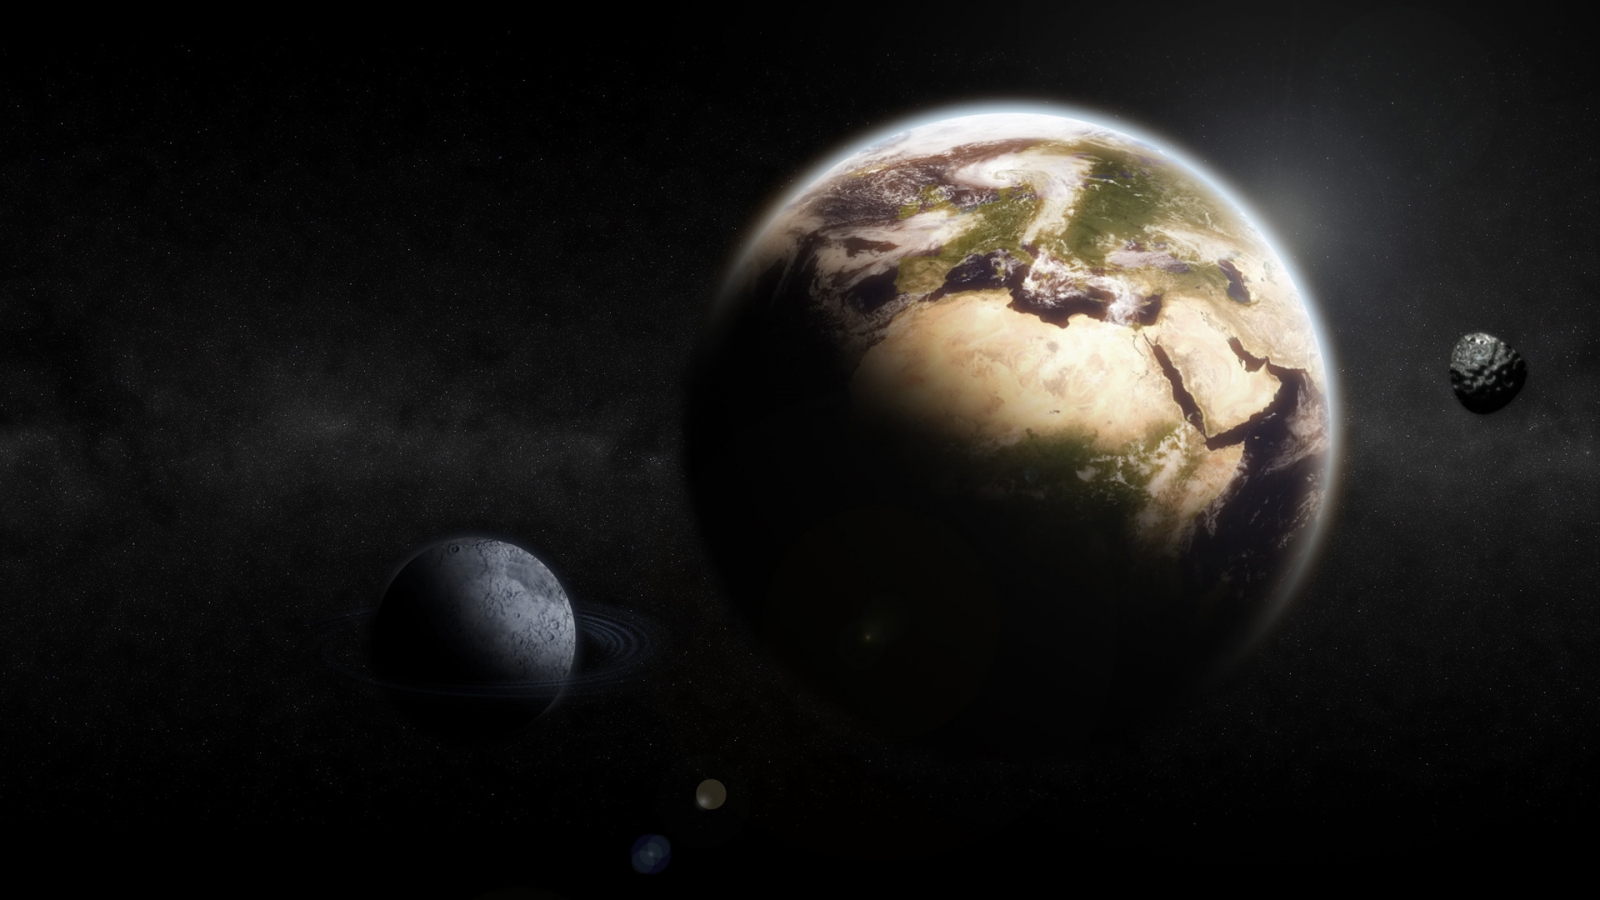 Earth & Moon for 1600 x 900 HDTV resolution